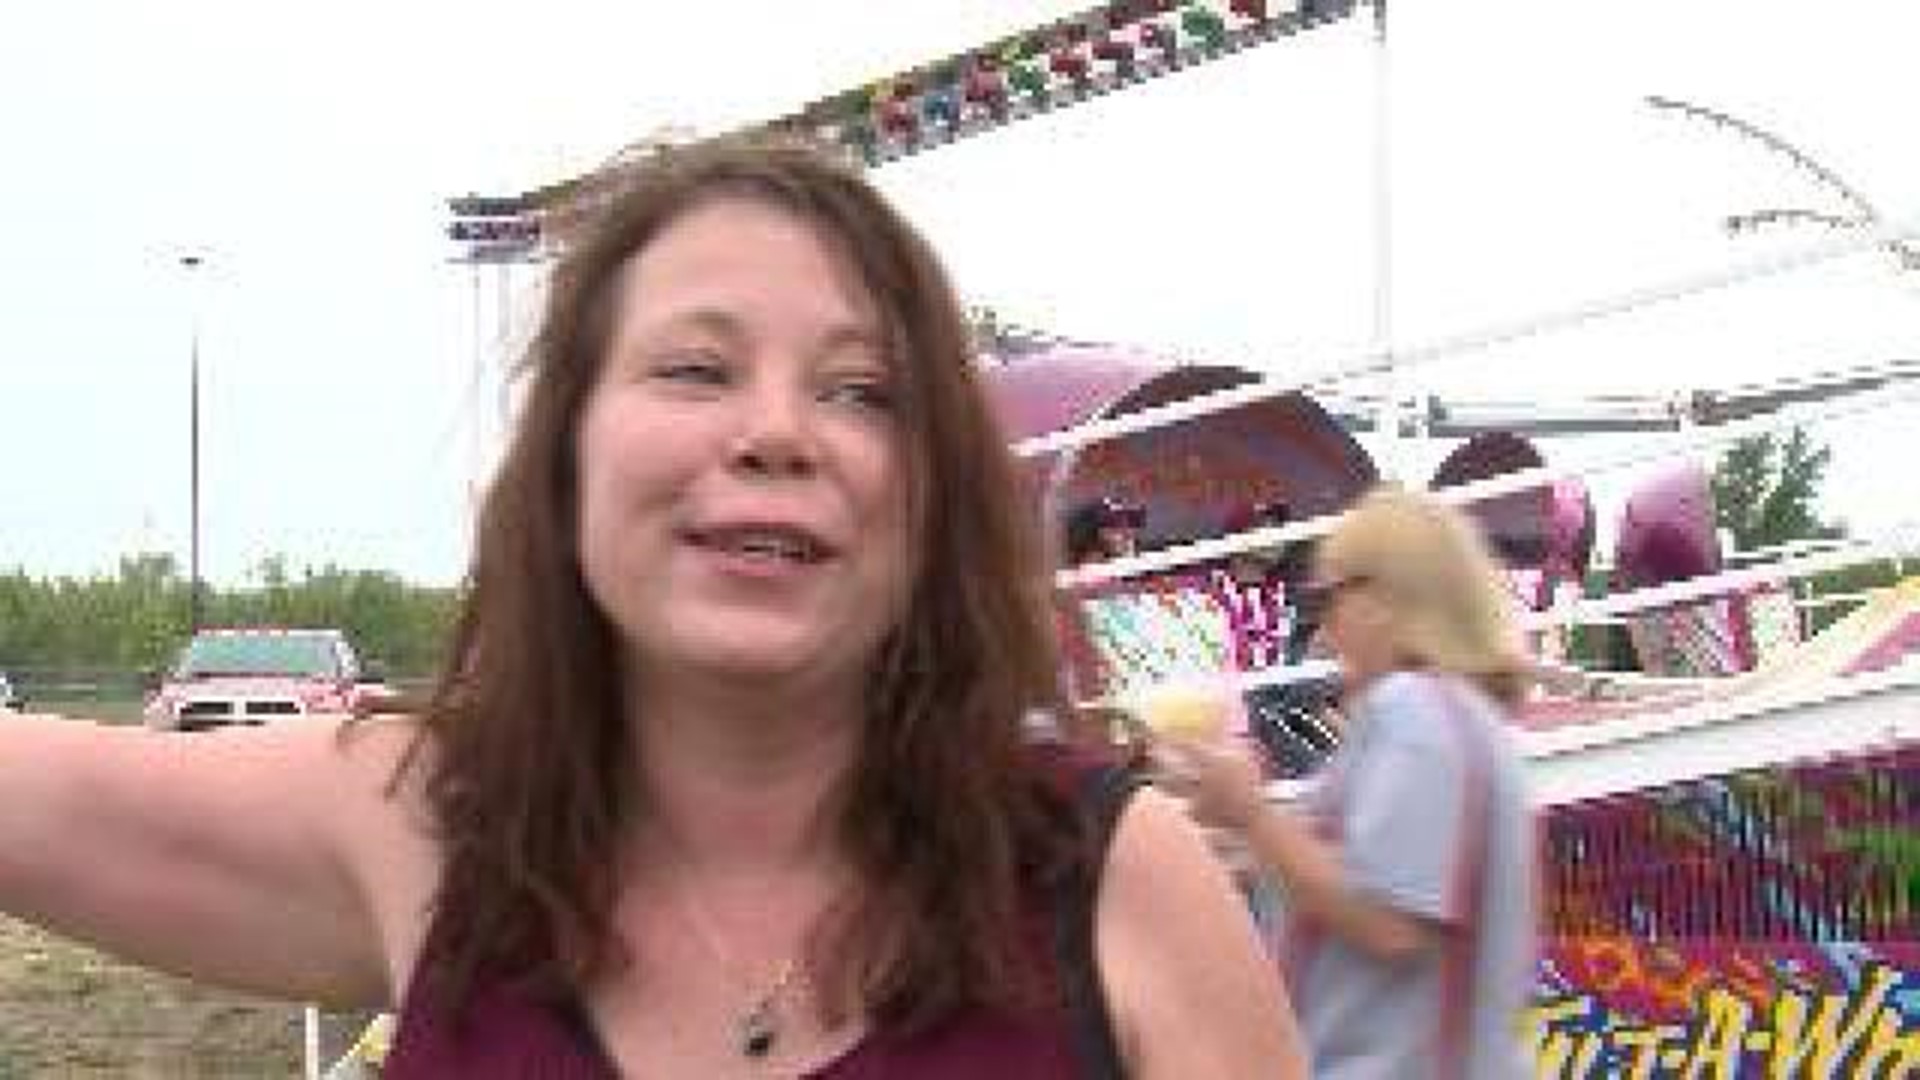 The Benton County Fair is wrapping up this weekend in Bentonville